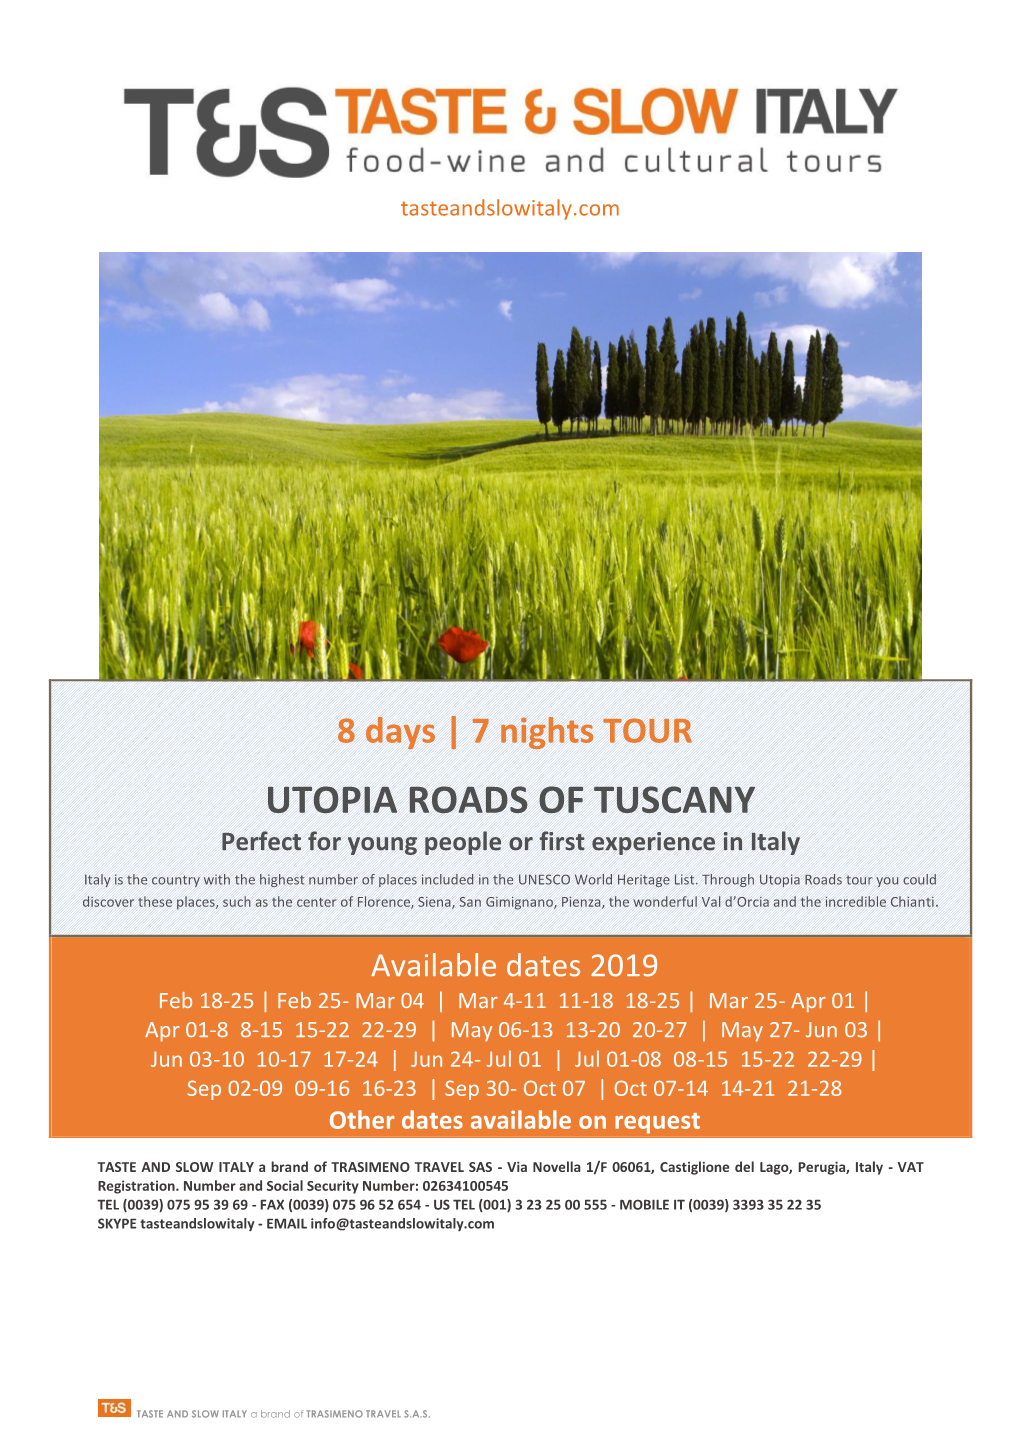 UTOPIA ROADS of TUSCANY Perfect for Young People Or First Experience in Italy